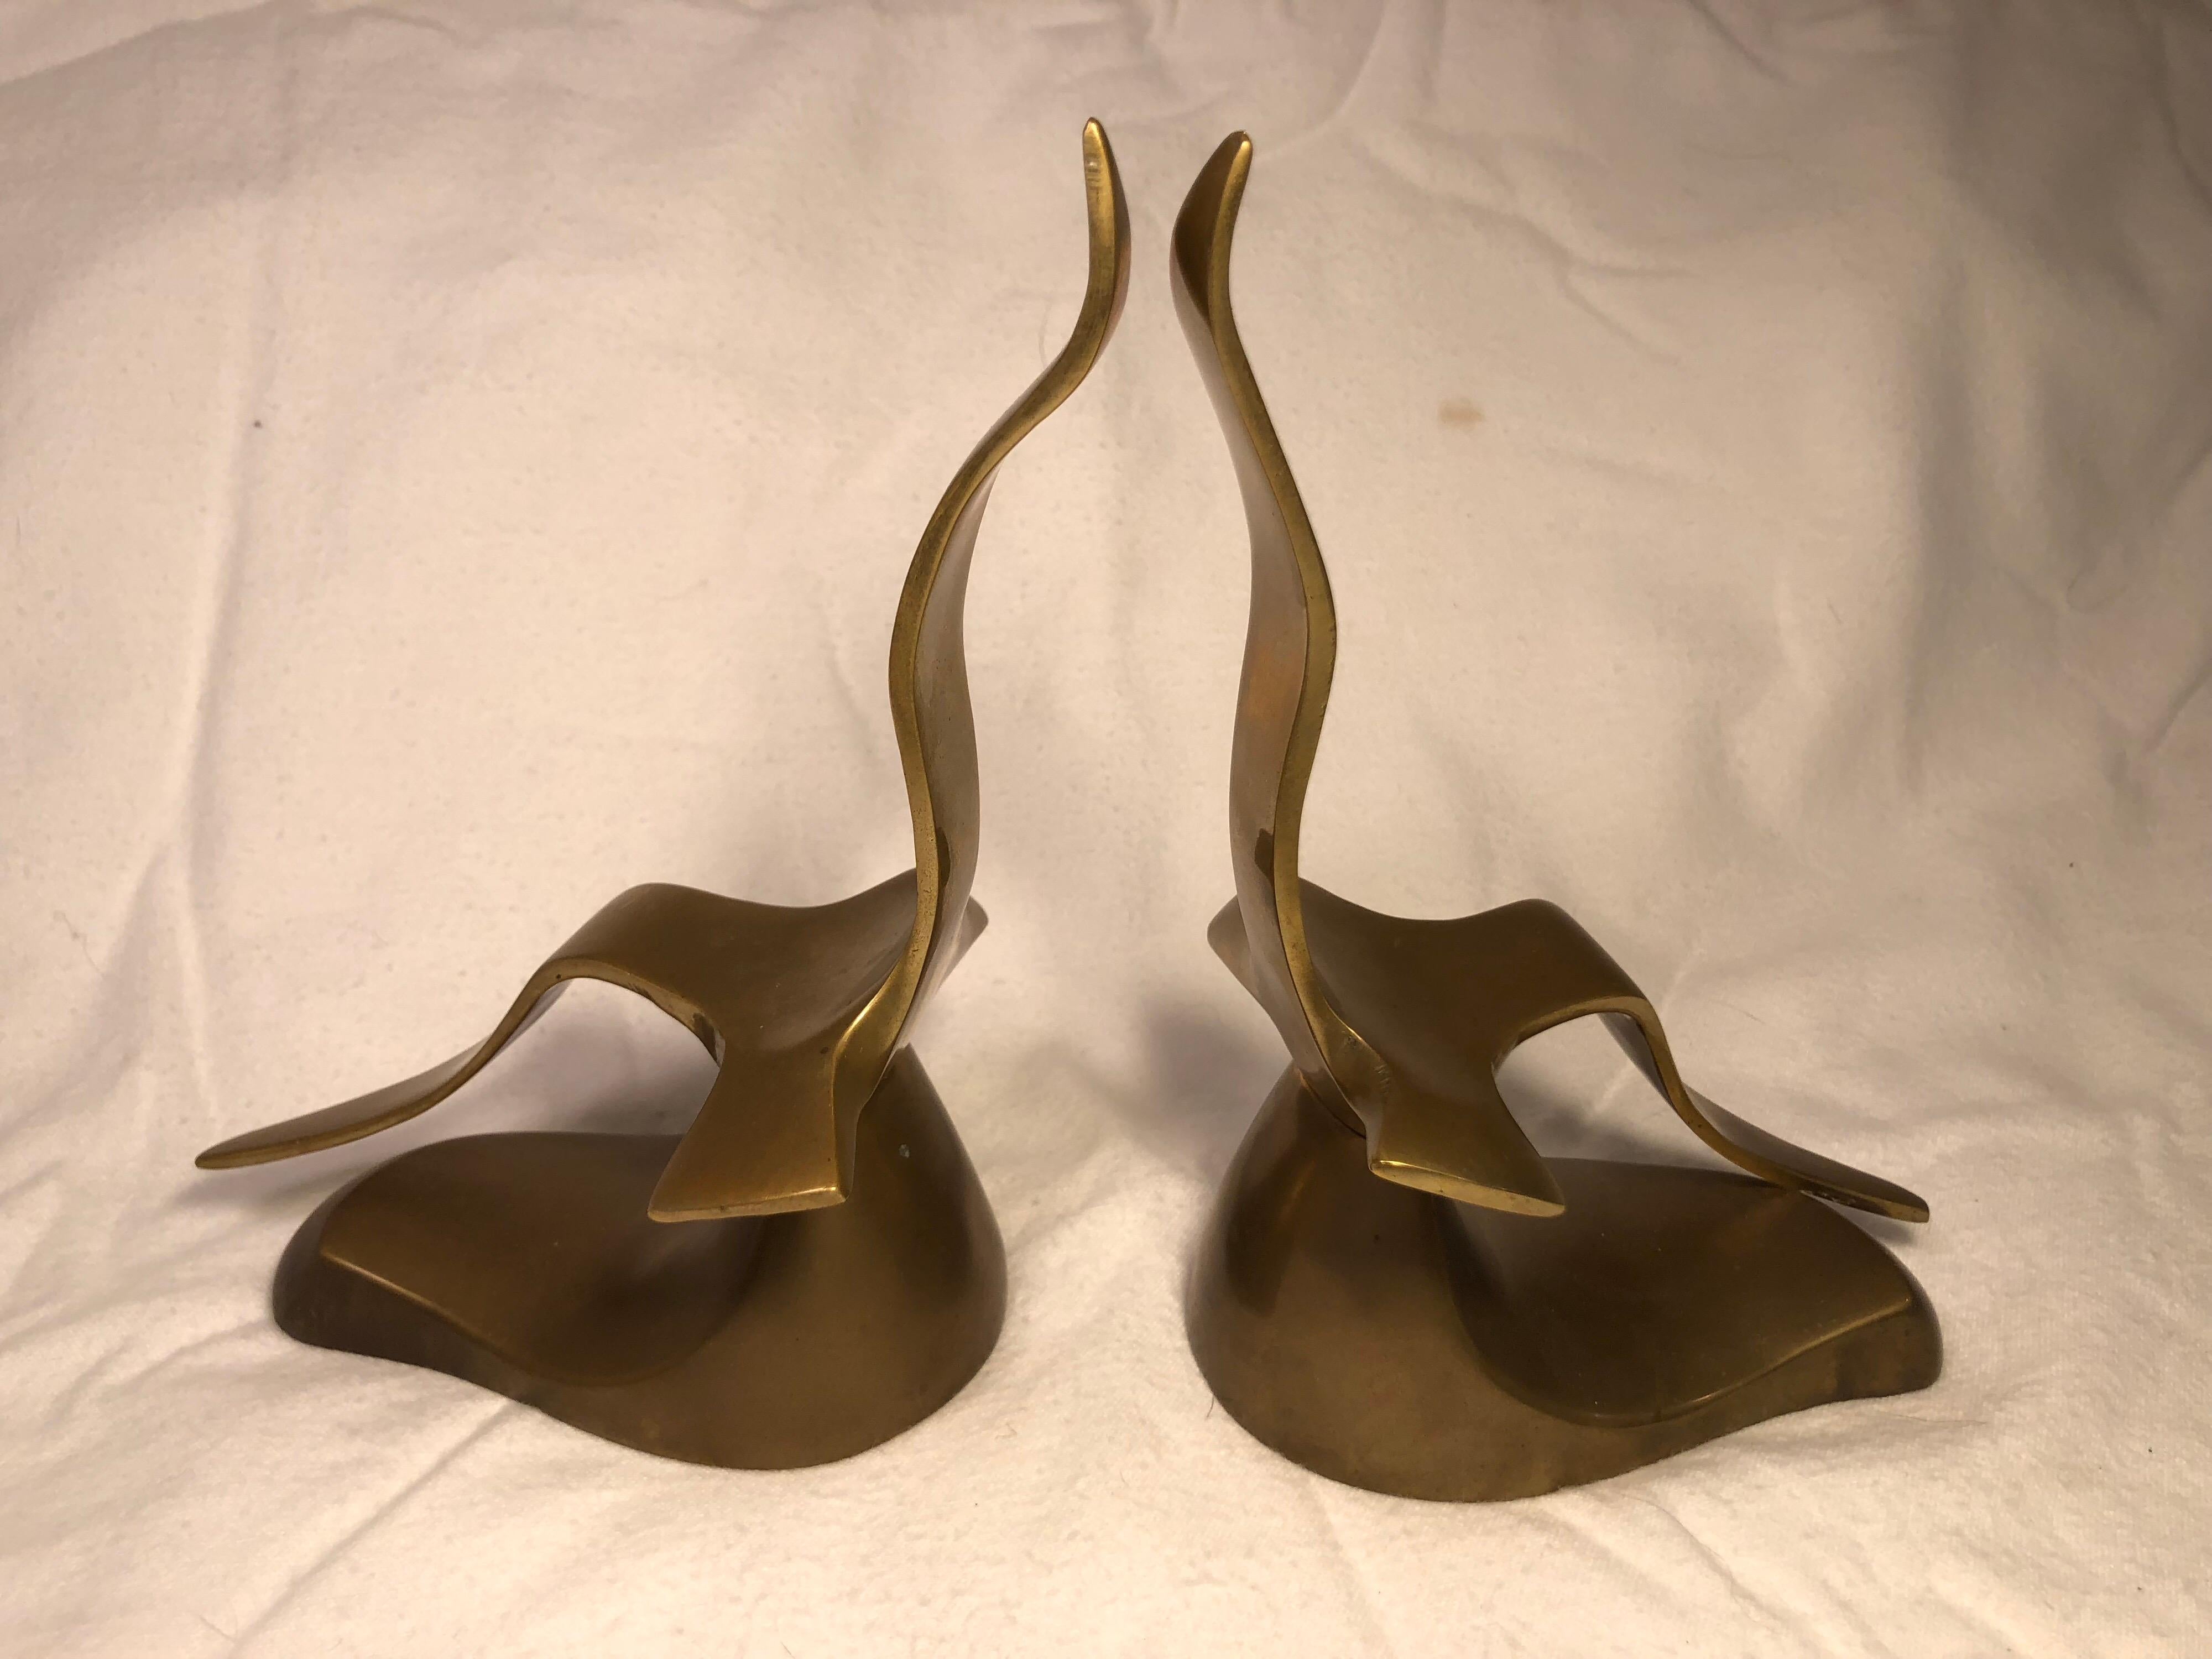 Late 20th Century Pair of Mid-Century Modern Brass Seagull Bookends